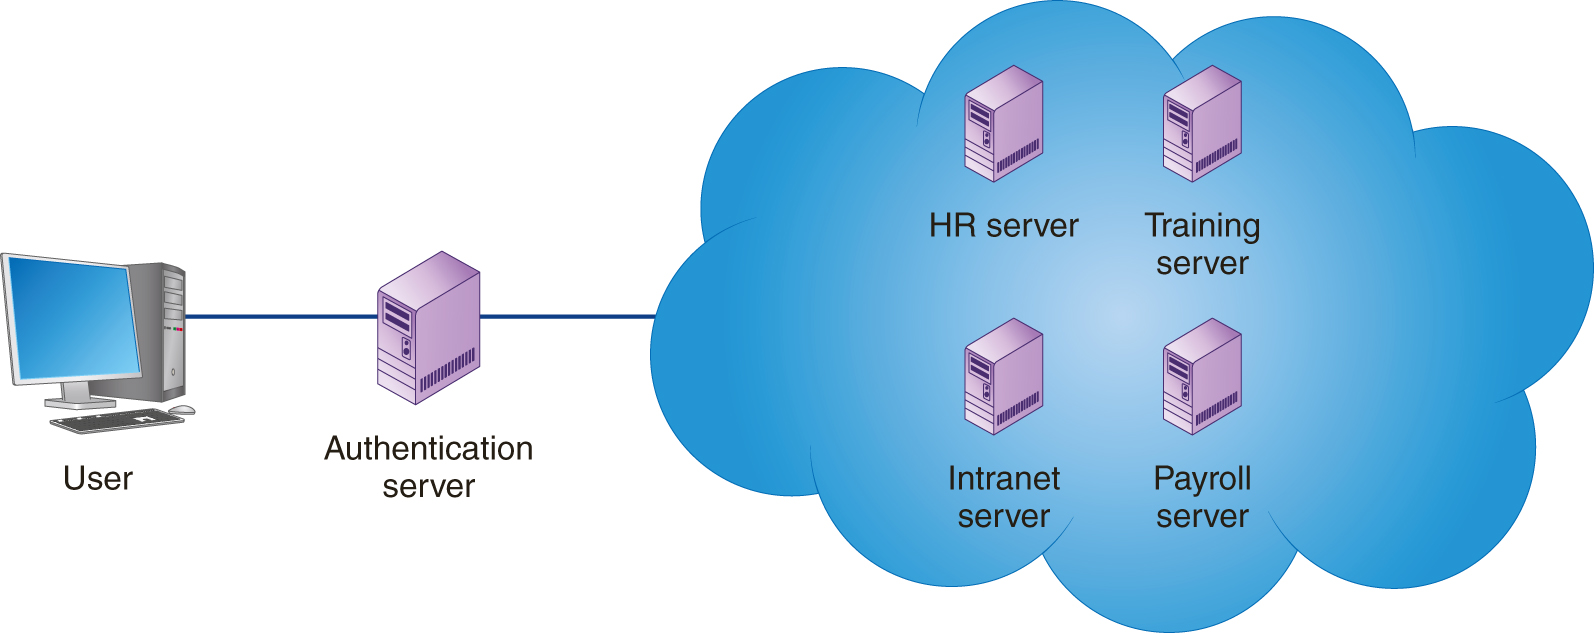 A user is connected to H R server, training server, intranet server, and payroll server in a large cloud through an authentication server.
